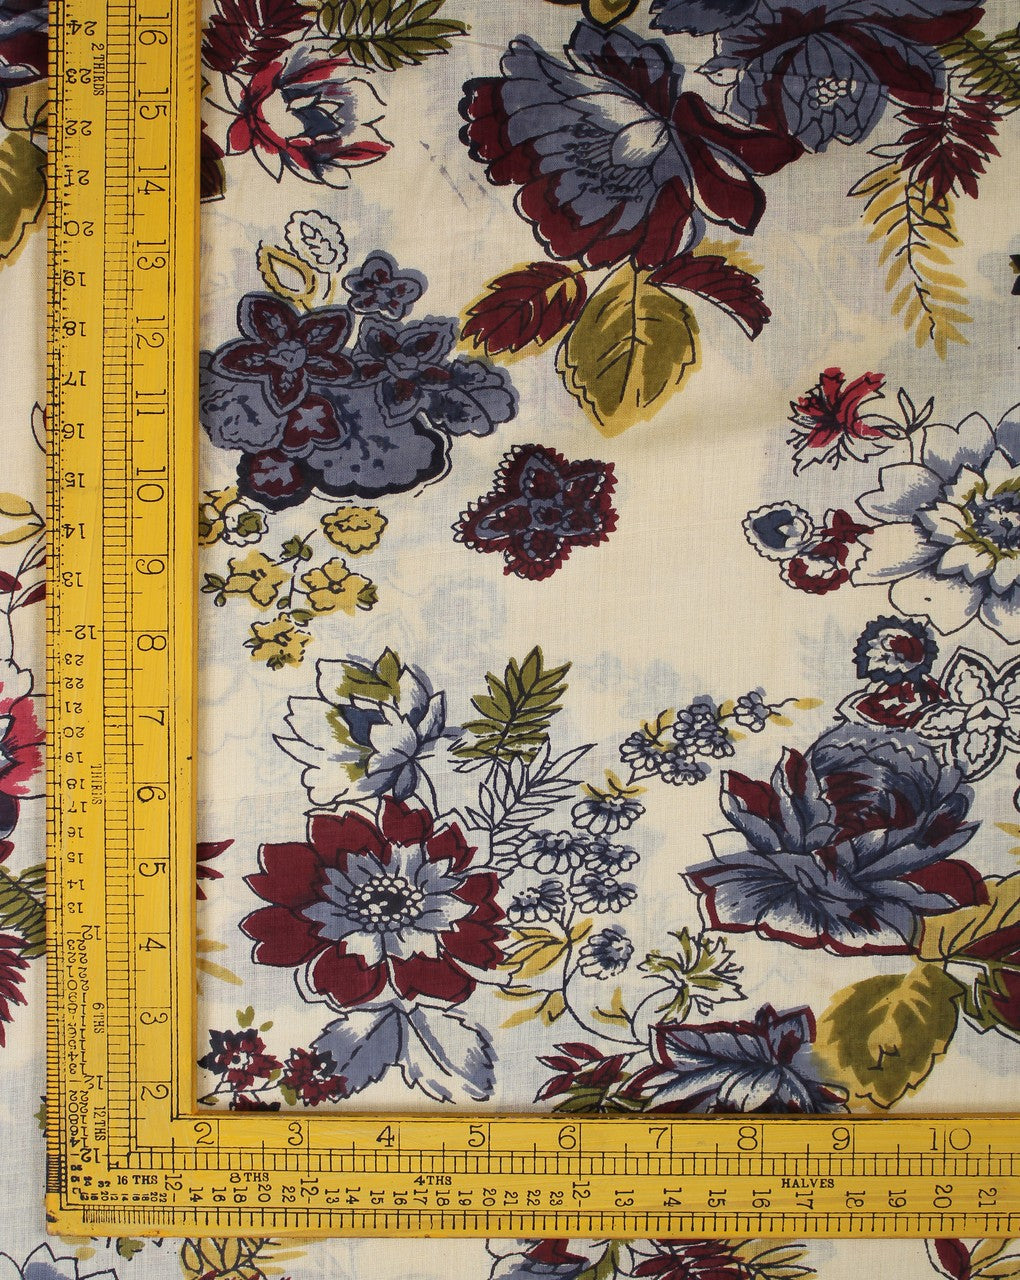 Light Yellow And Multicolor Floral Design Cotton Voil Fabric